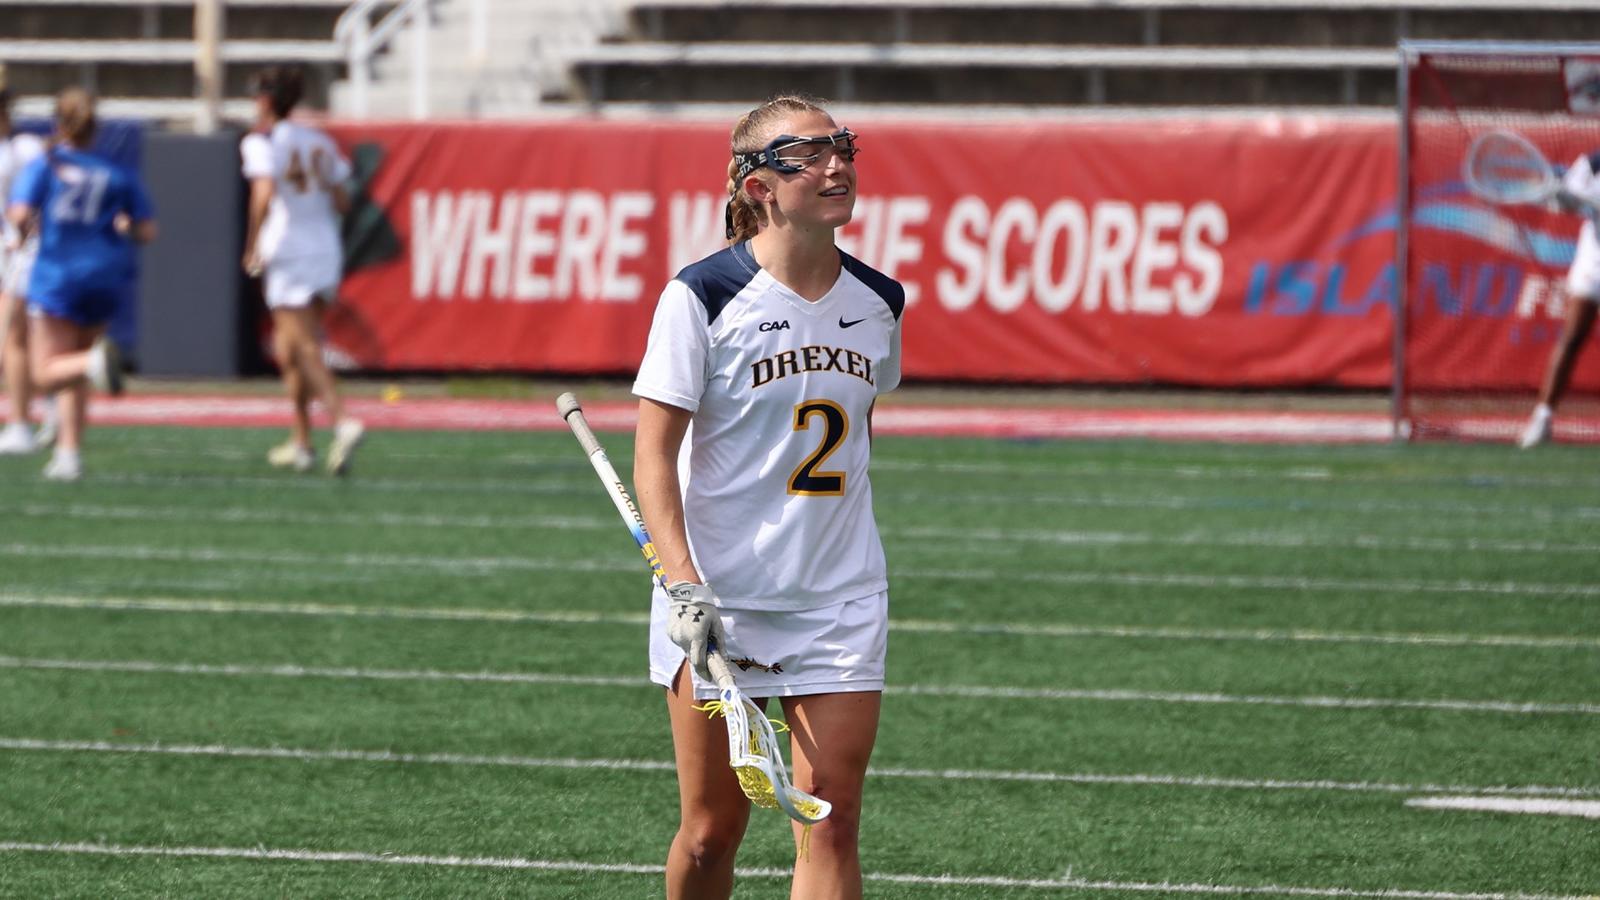 Corinne Bednarik Finishes with 11 Points as Drexel Storms Past Hofstra to Advance to CAA Championship